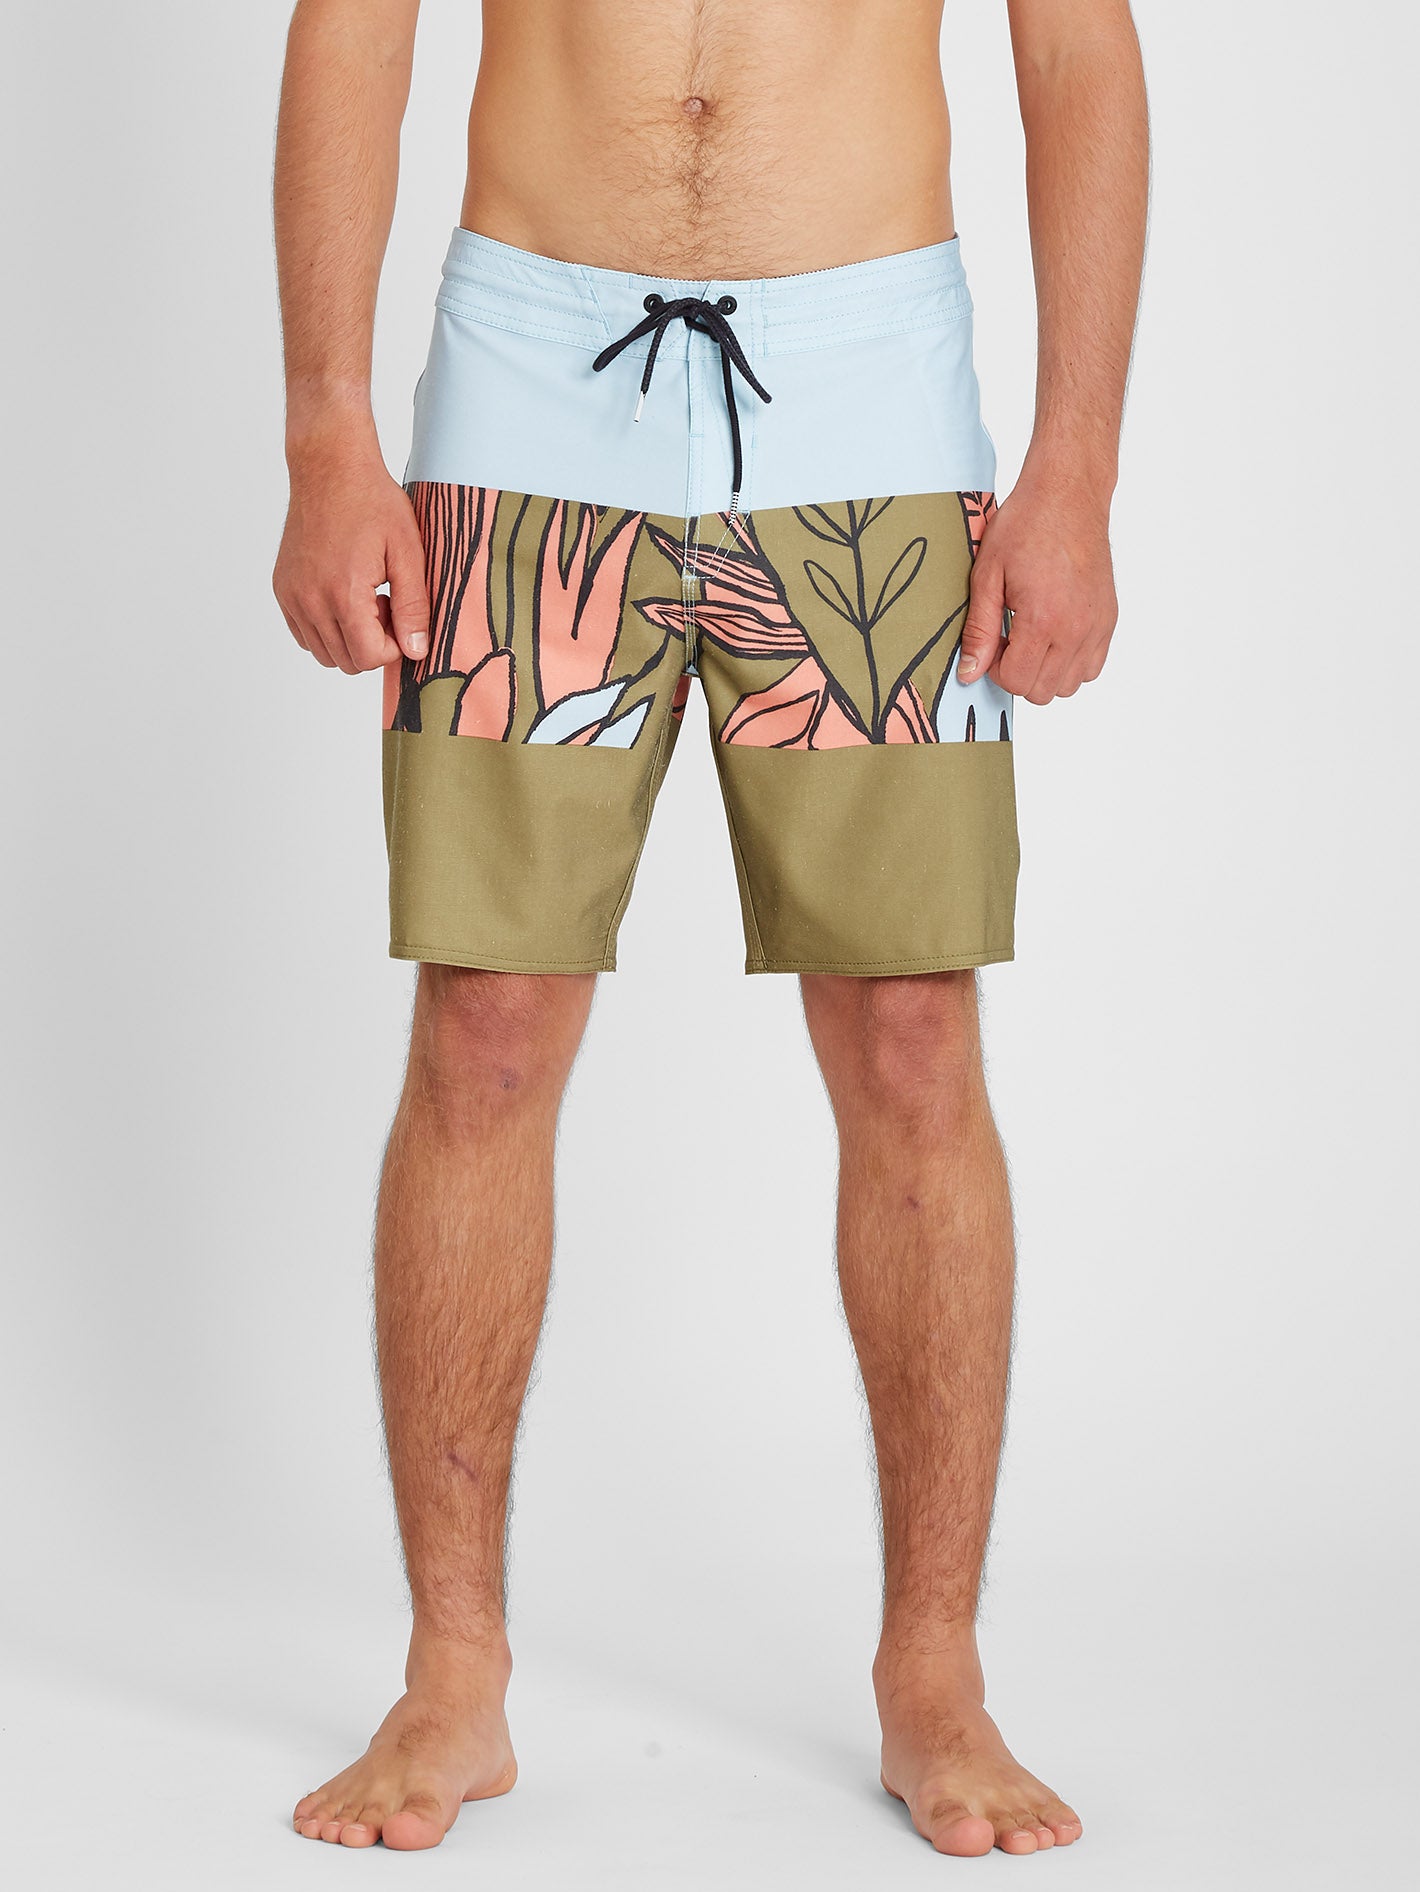 Tropic Blotter Panel 18" Boardshort - Old Mill (A0812105_OLM) [f]